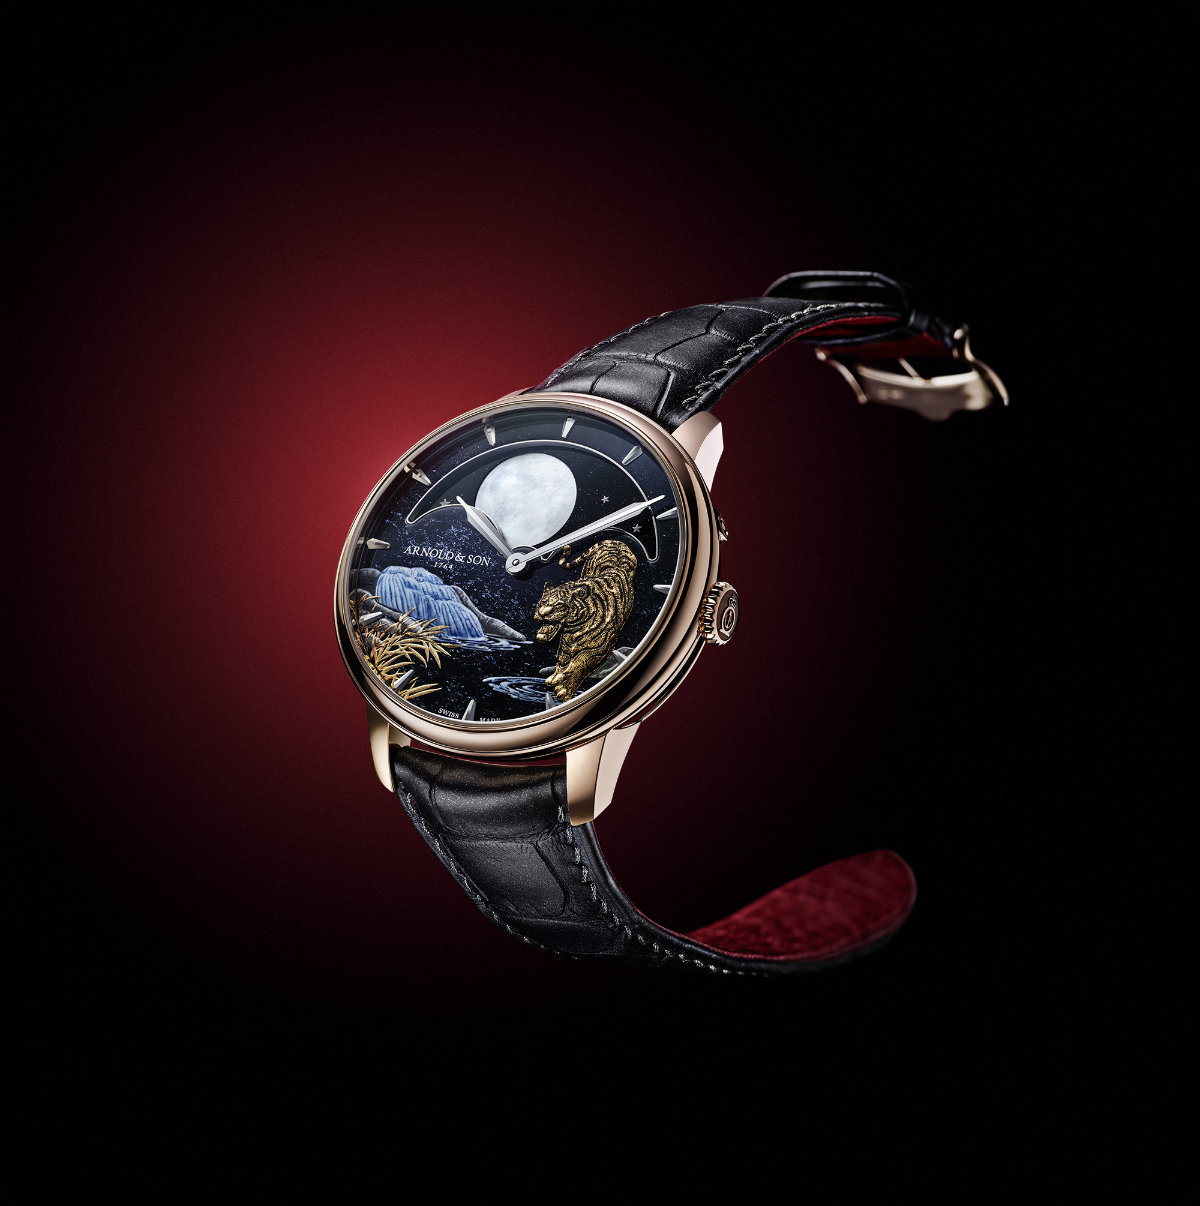 Arnold & Son's “Year Of The Tiger” Perpetual Moon: Golden Water Tiger